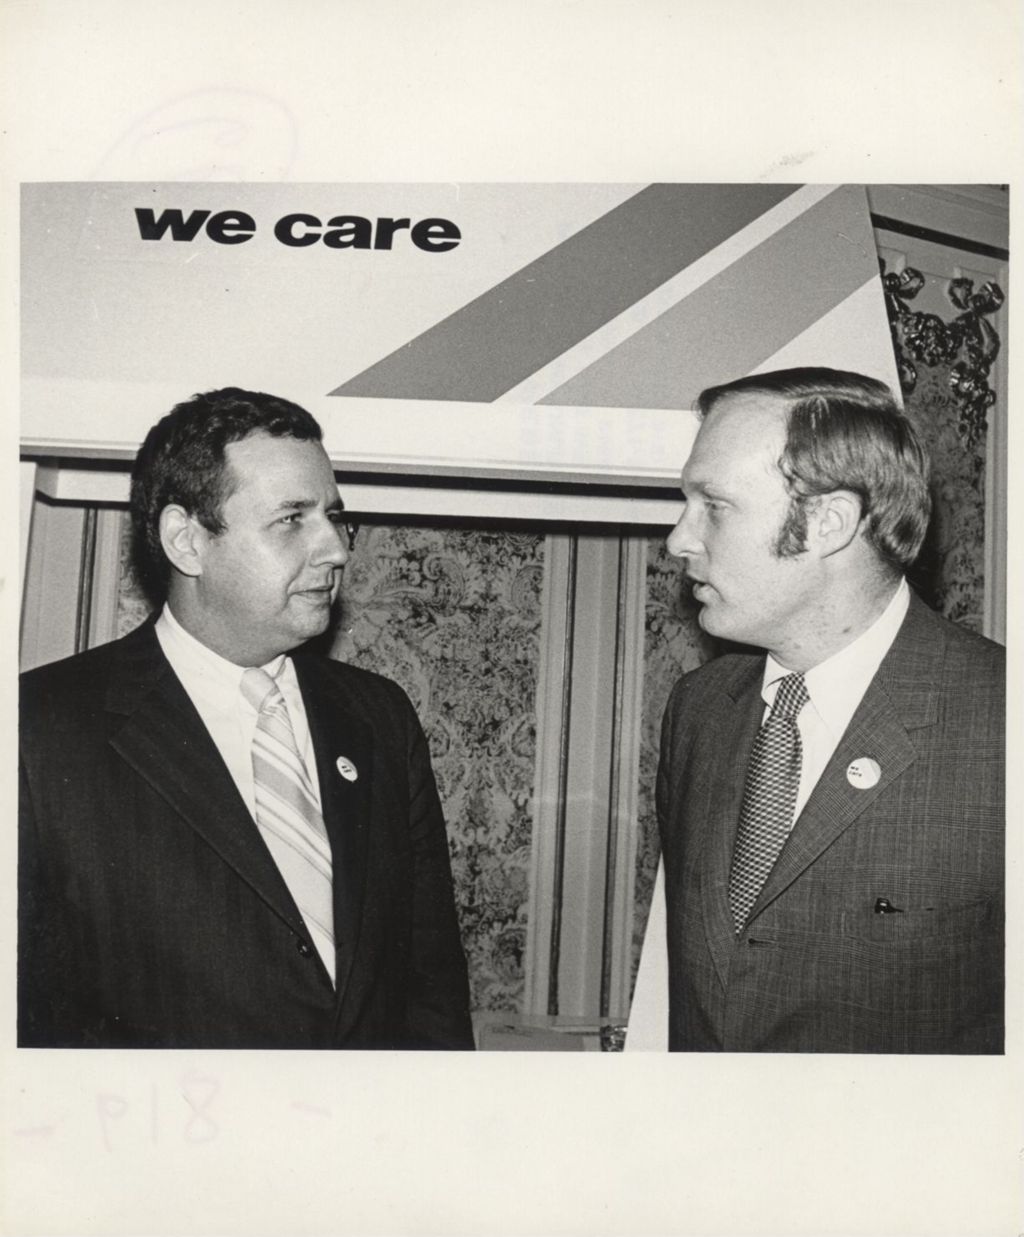 Two men at a "We Care" campaign event